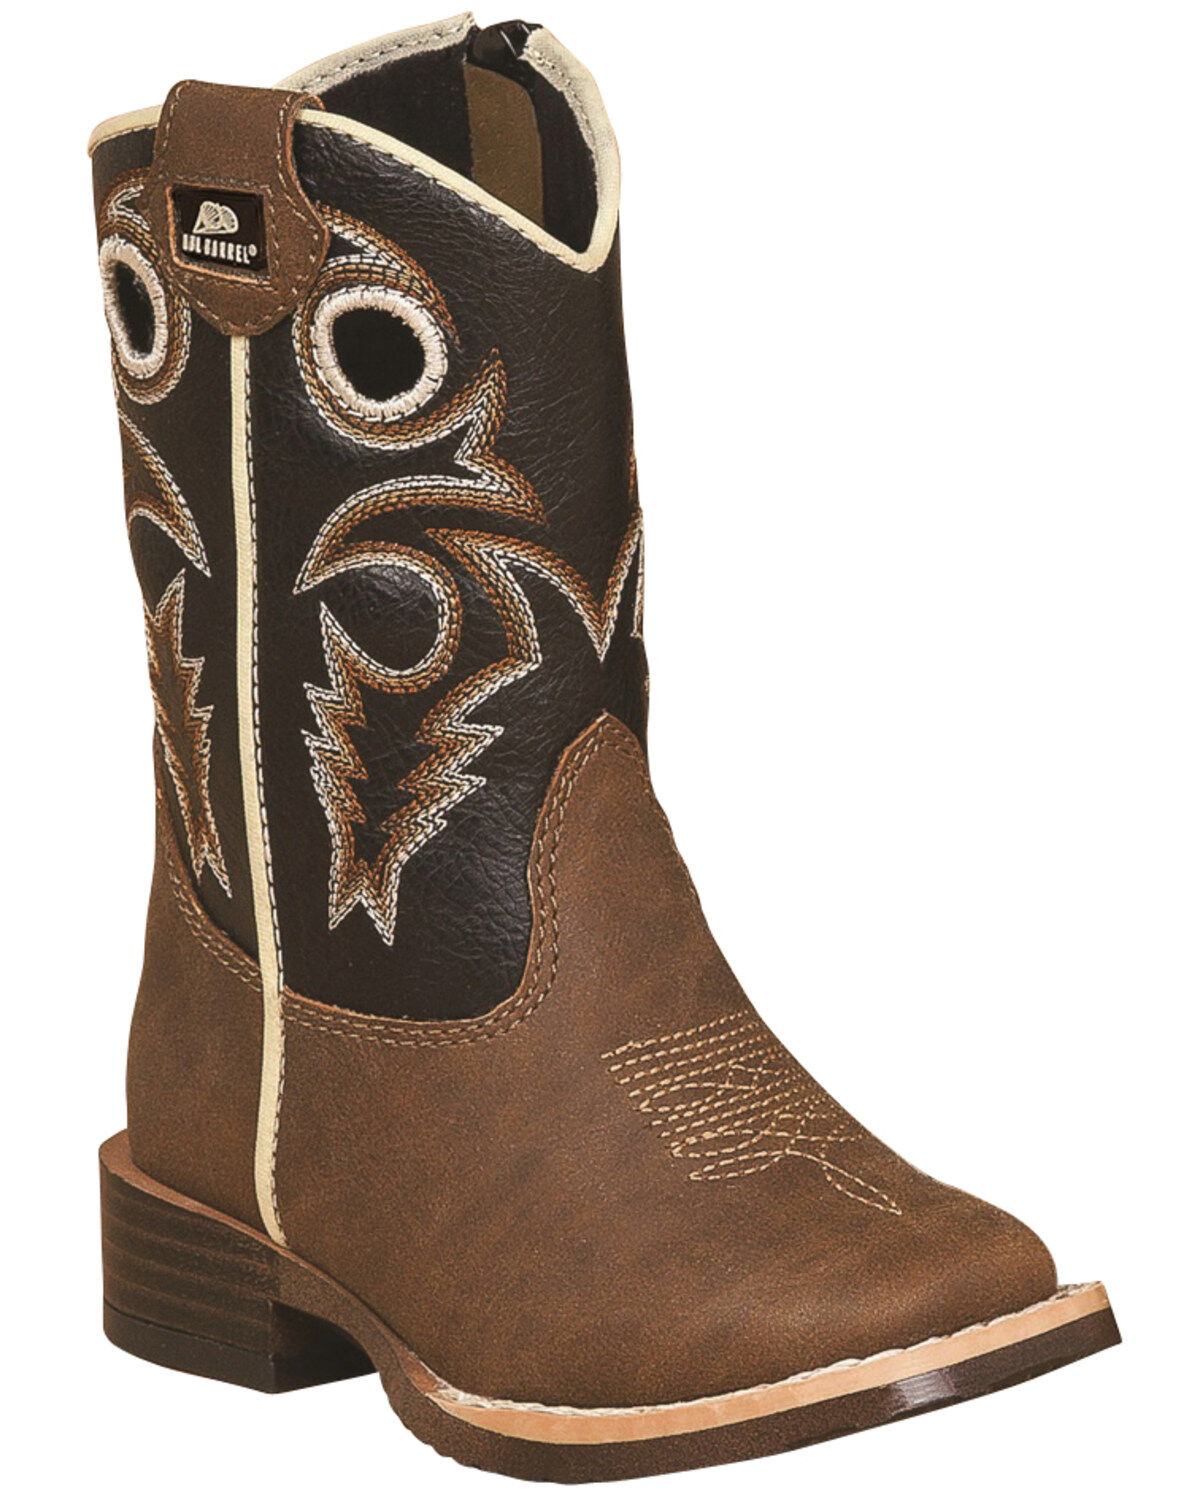 youth cowboy boots canada